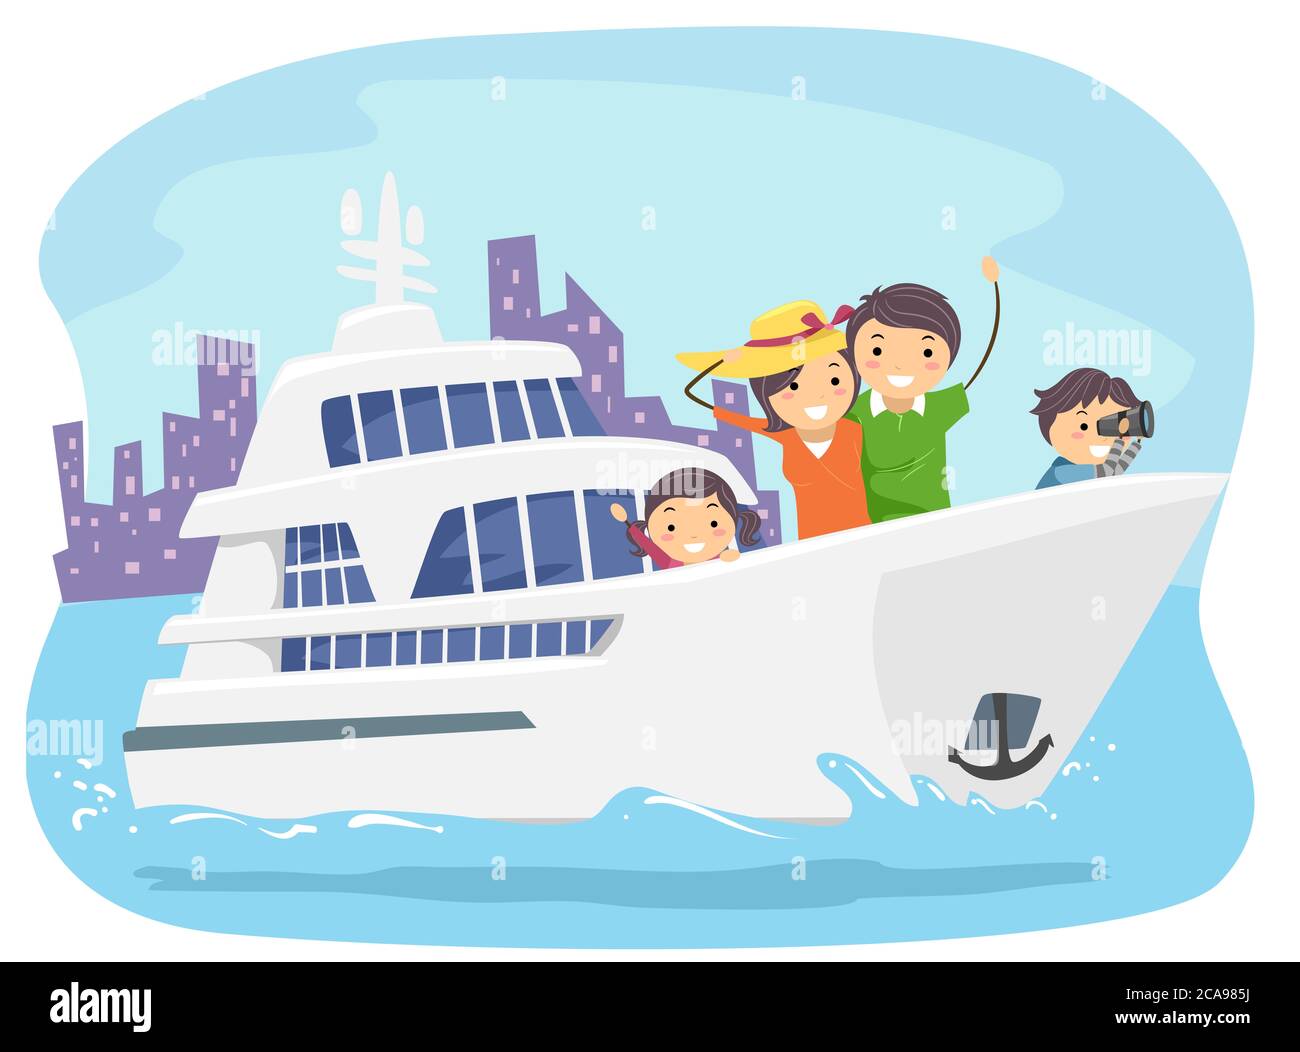 Illustration of a Stickman Family in a Yacht Tour Stock Photo